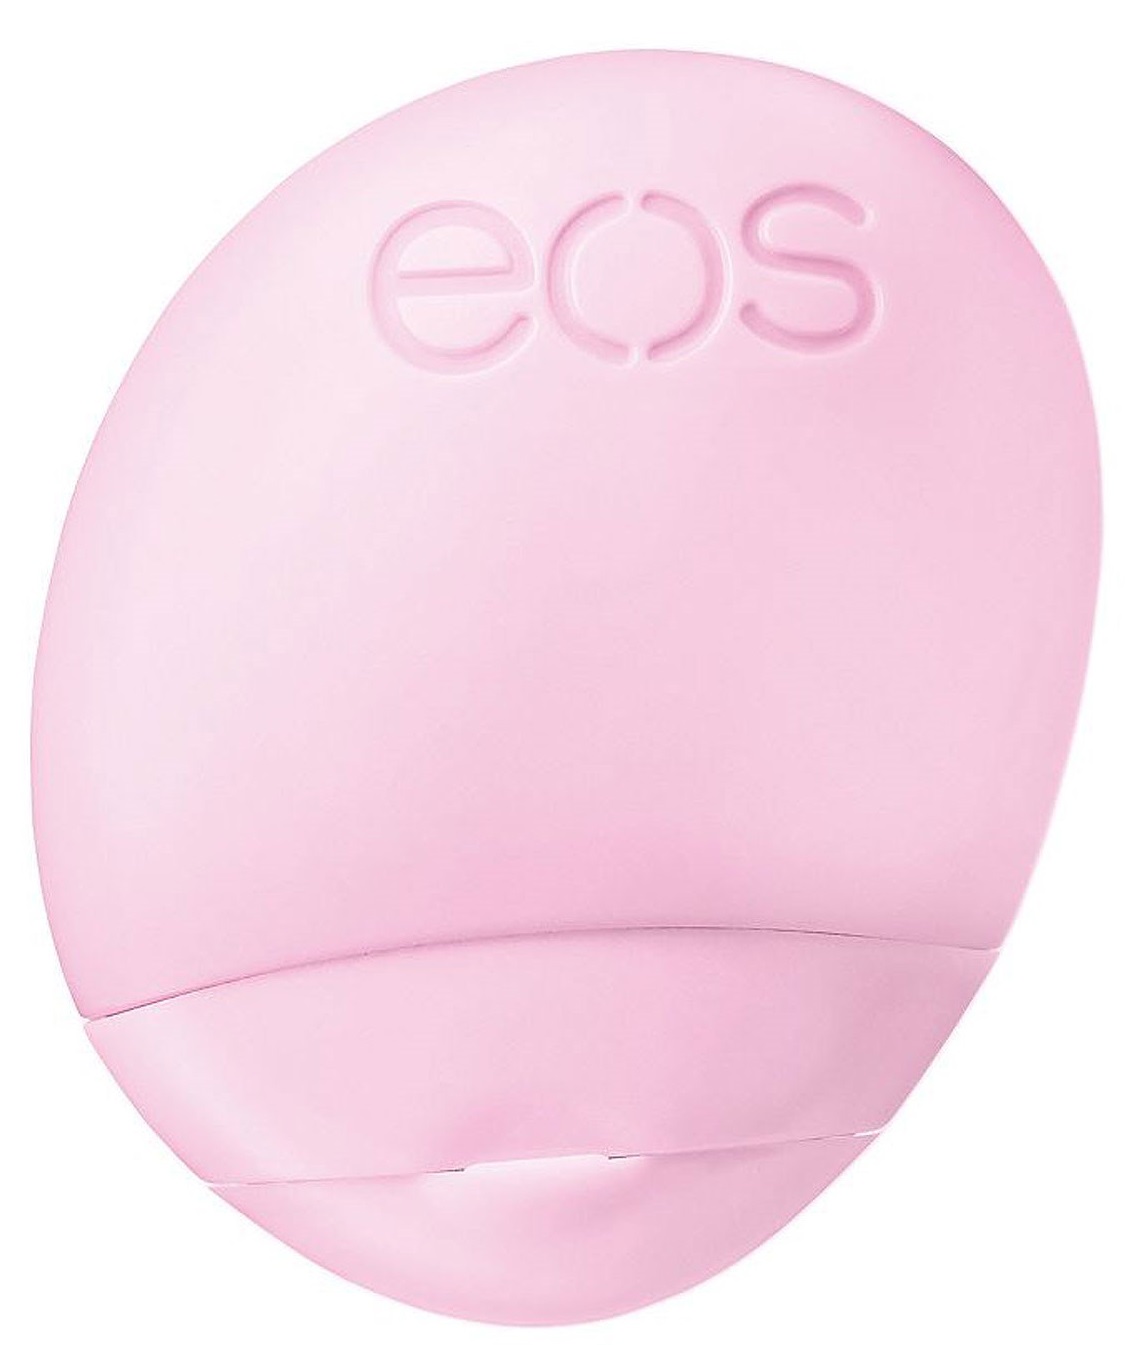 EOS Hand Lotion